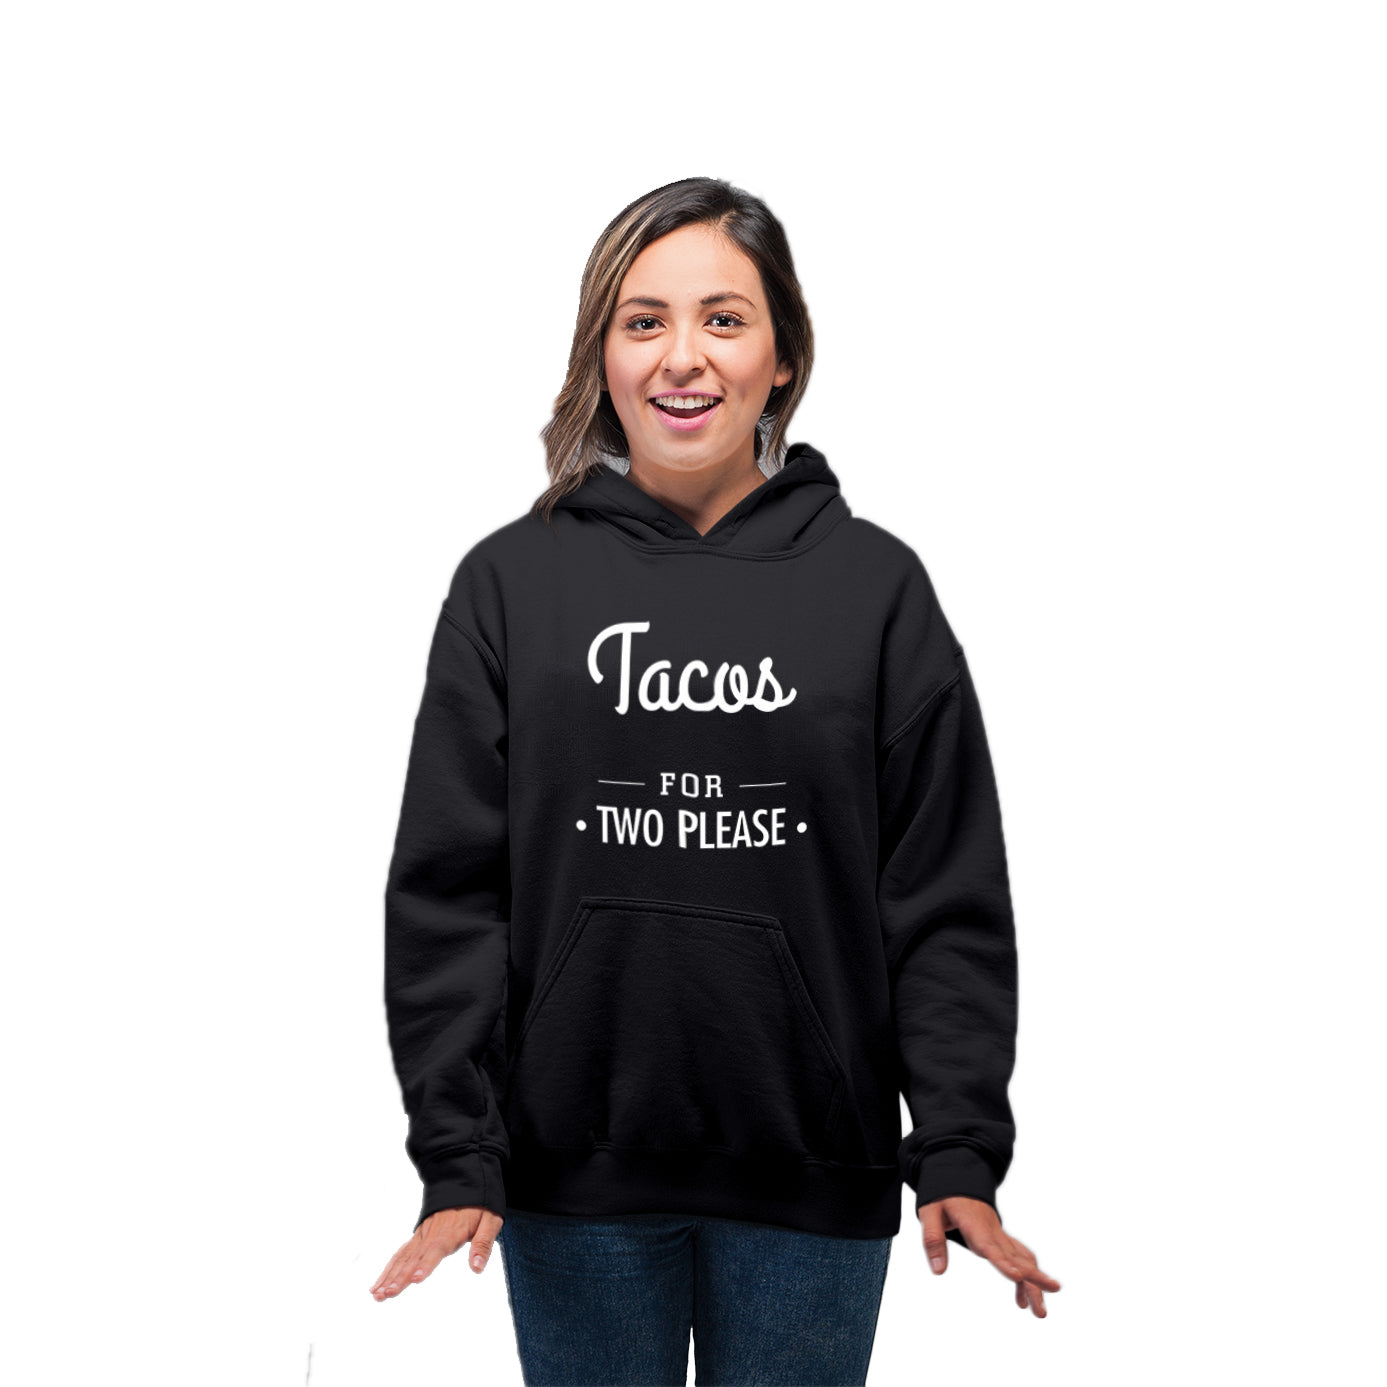 Tacos for two Matching Maternity Sweatshirts | Couple Maternity Hoodies- Black